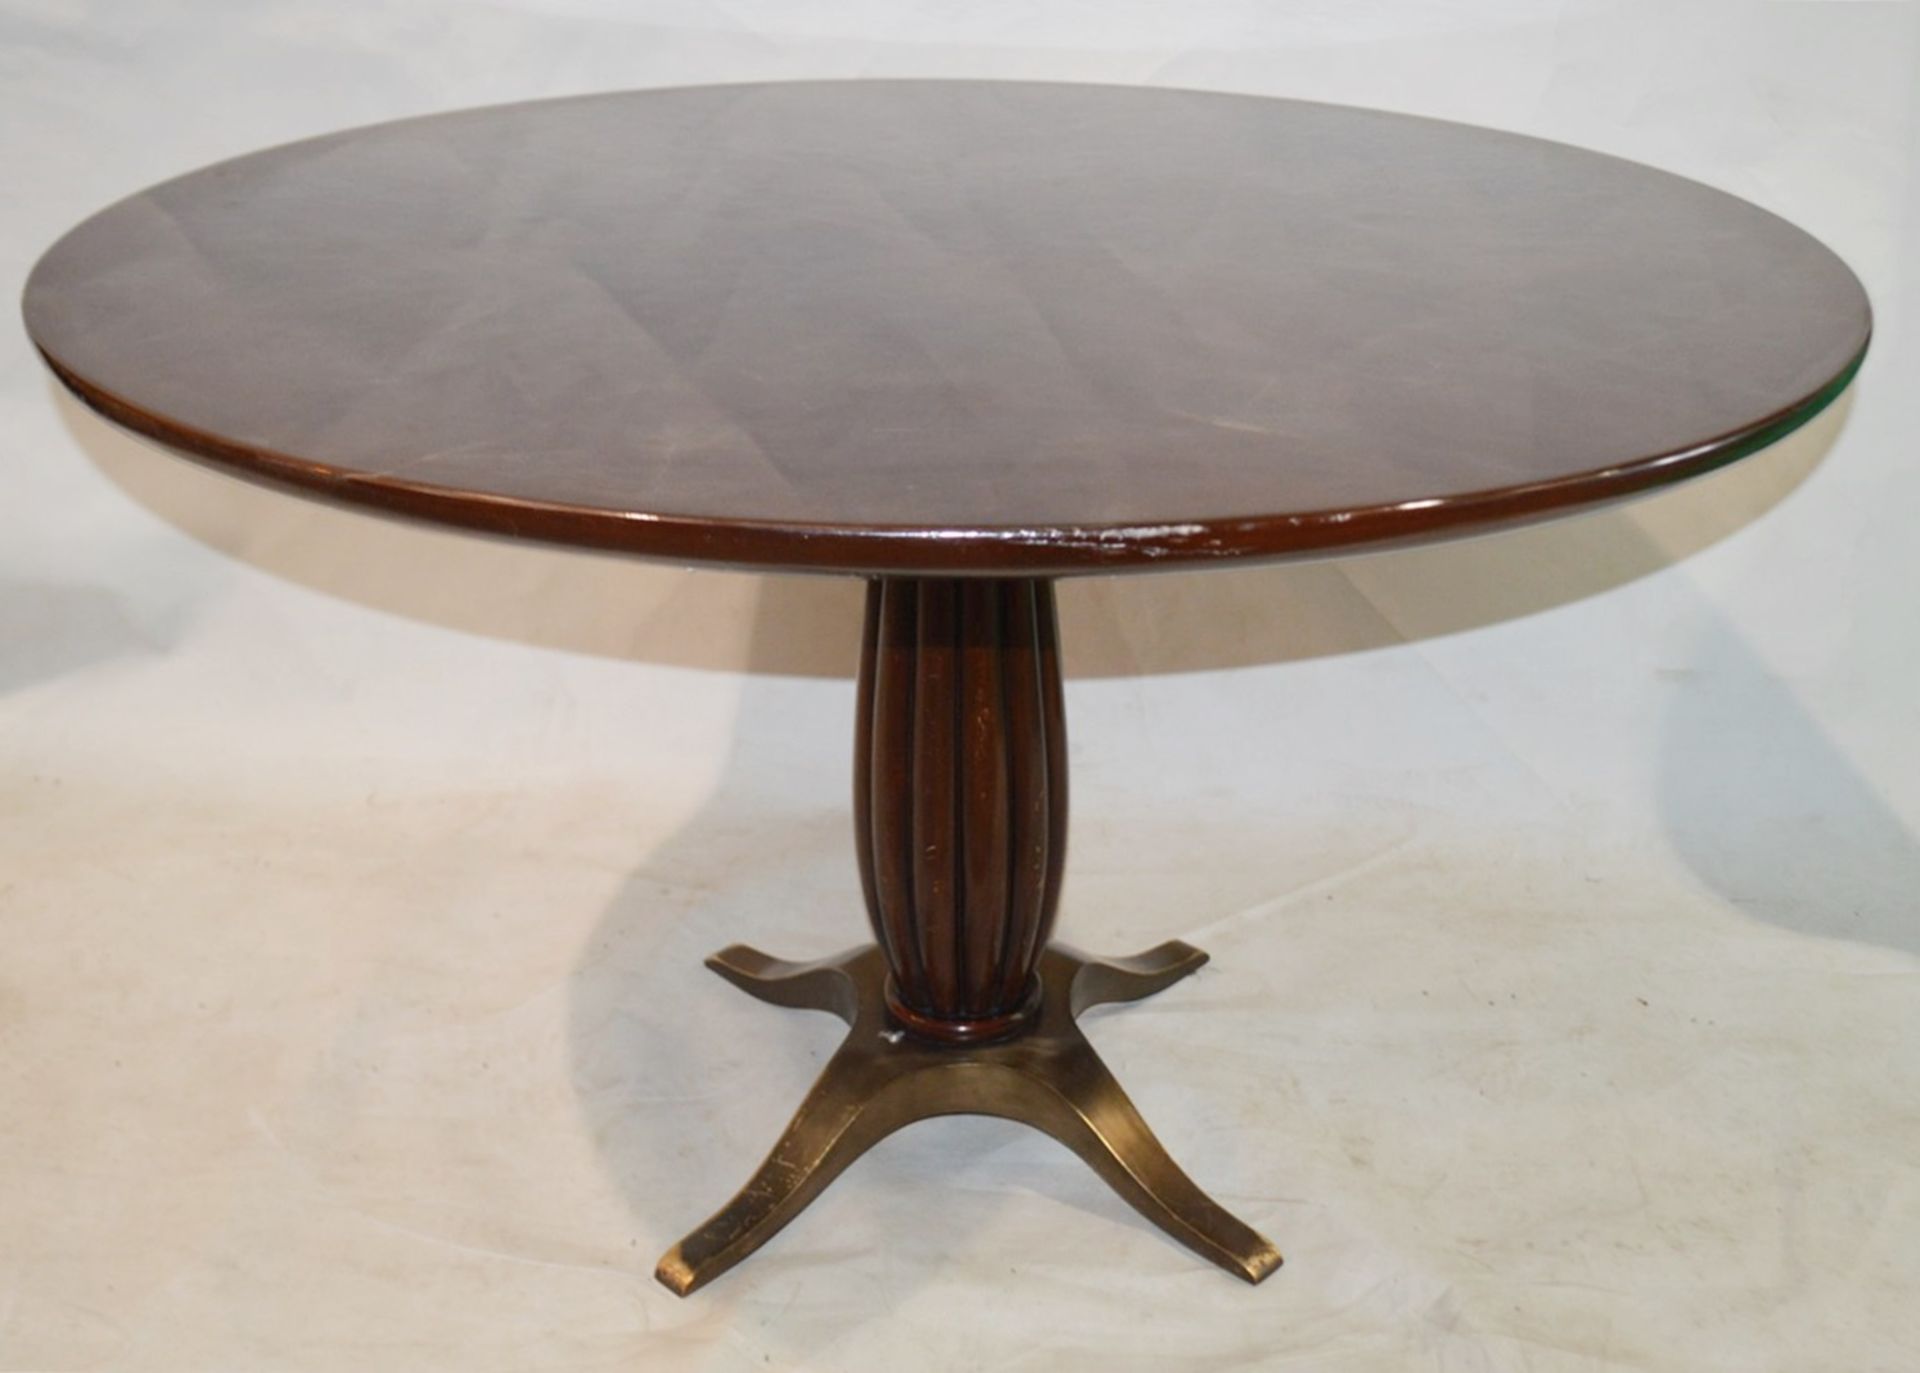 1 x Christopher Guy 'Toulouse' Round Georgian-Style Restaurant Dining Table - Original RRP £4,600.00 - Image 2 of 6